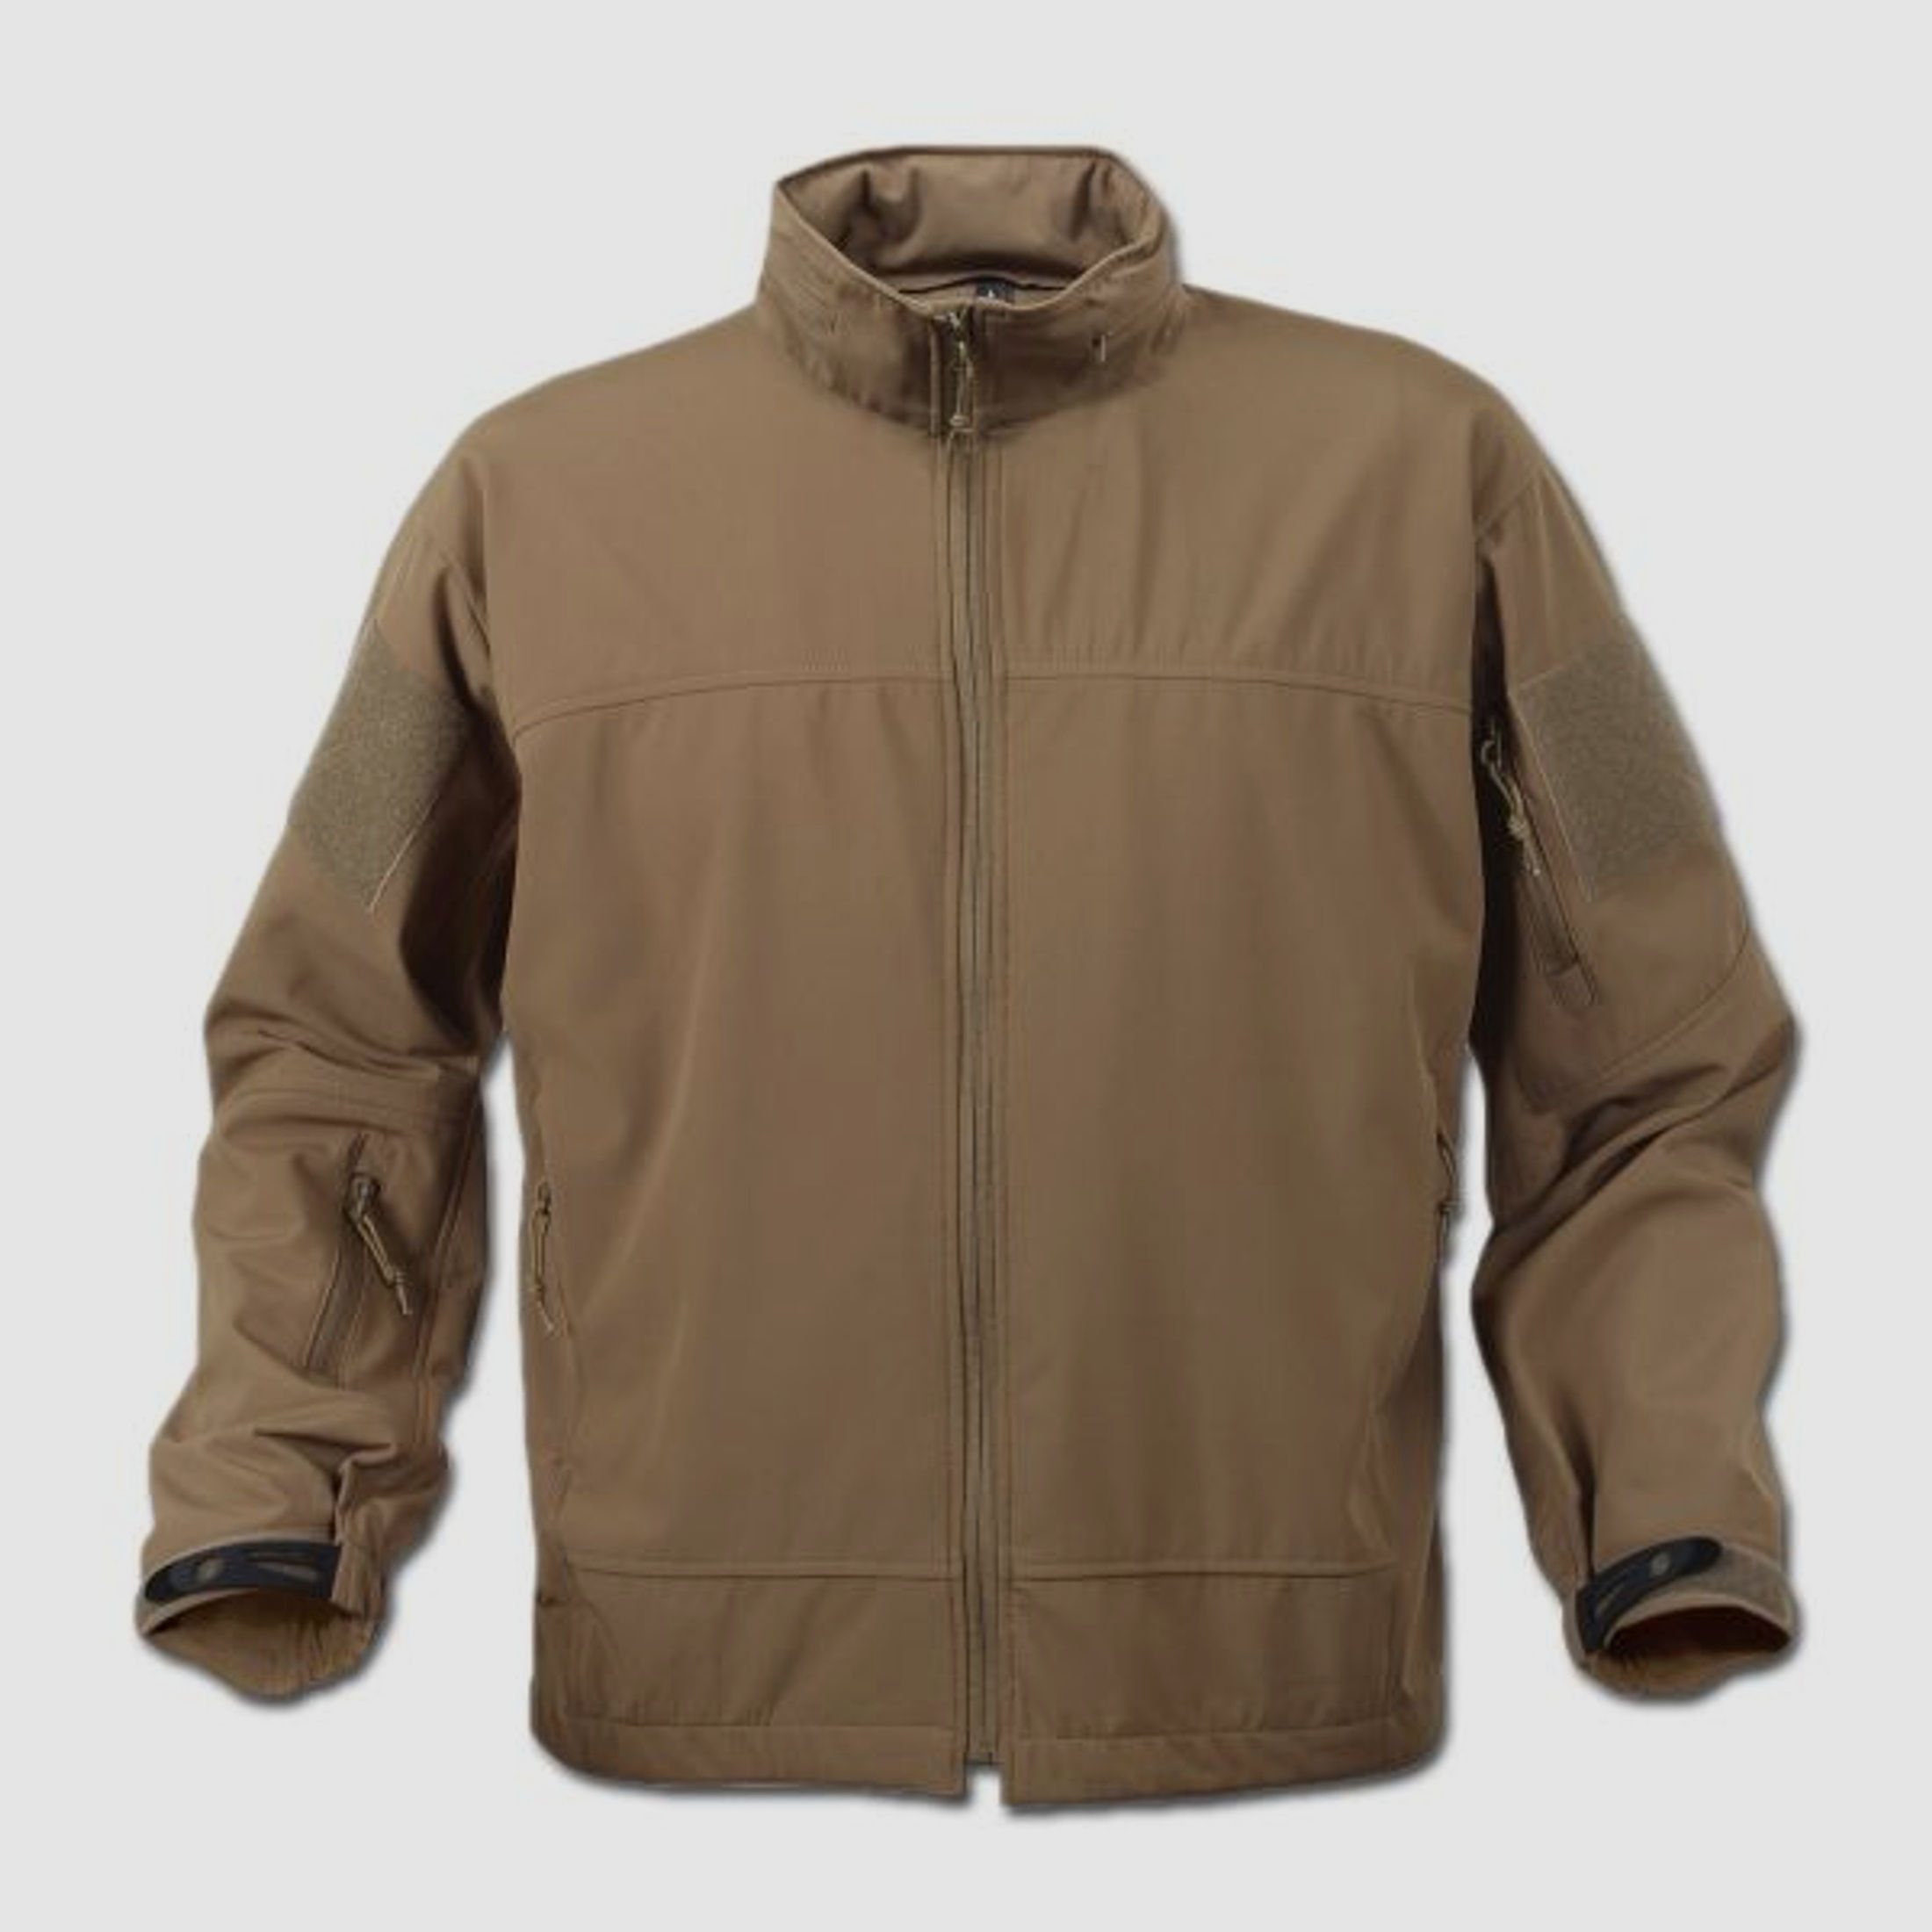 Rothco Rothco Covert Spec Ops Lightweight Soft Shell Jacke Coyote Braun